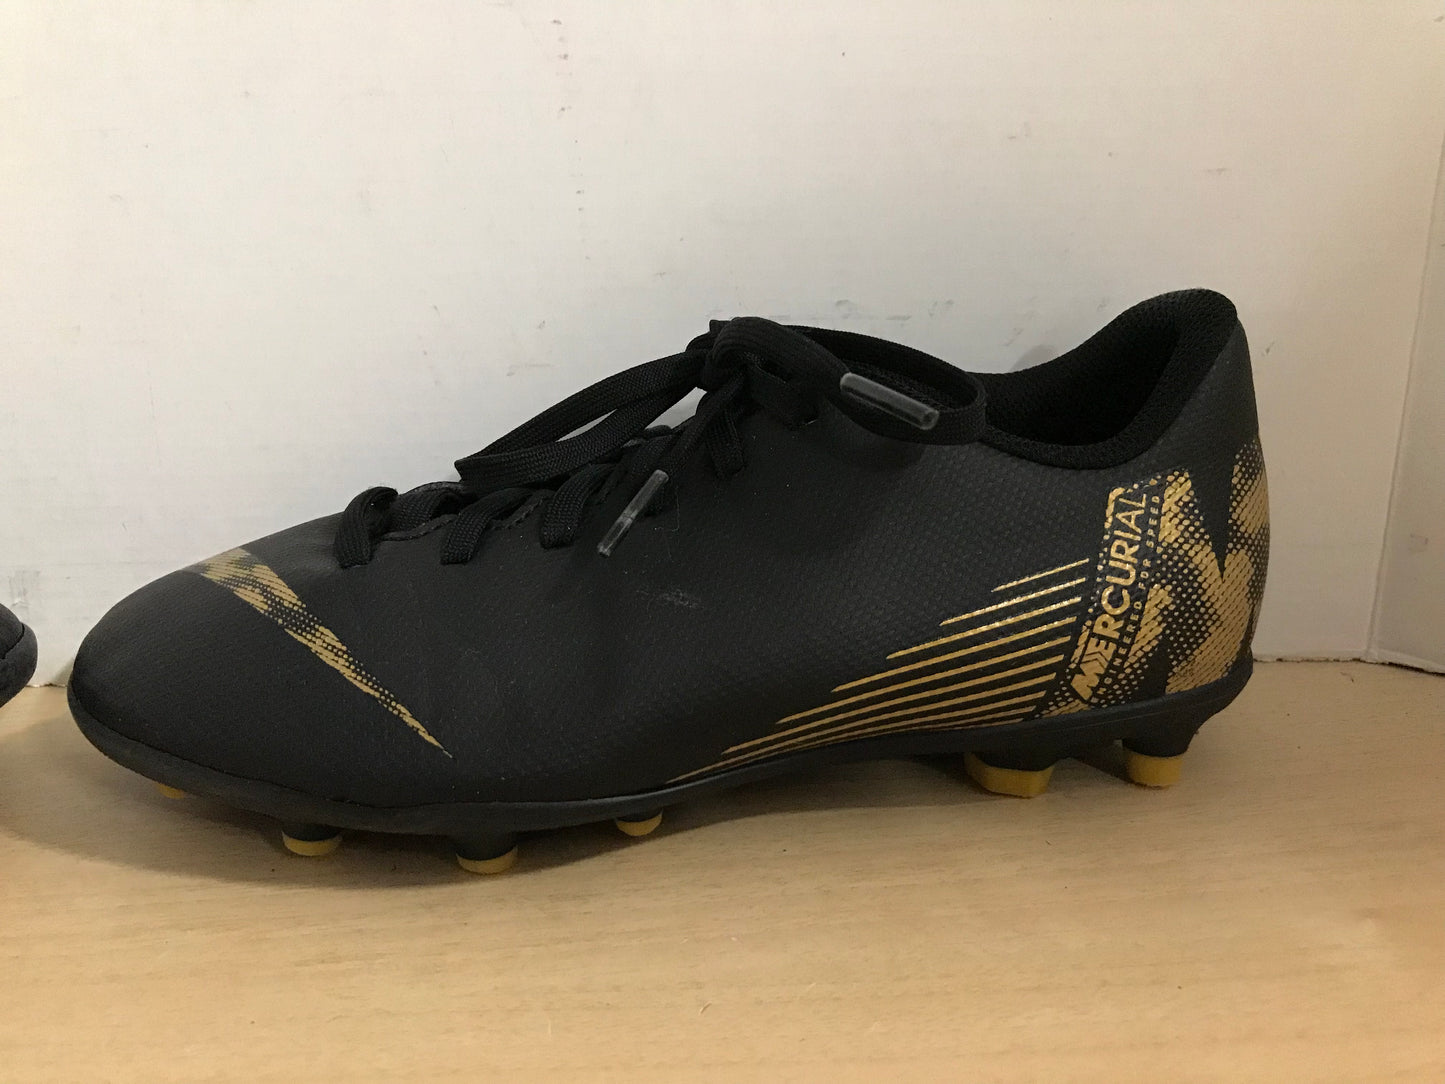 Soccer Shoes Cleats Child Size 4 Nike Mercurial Black Gold New Demo Model